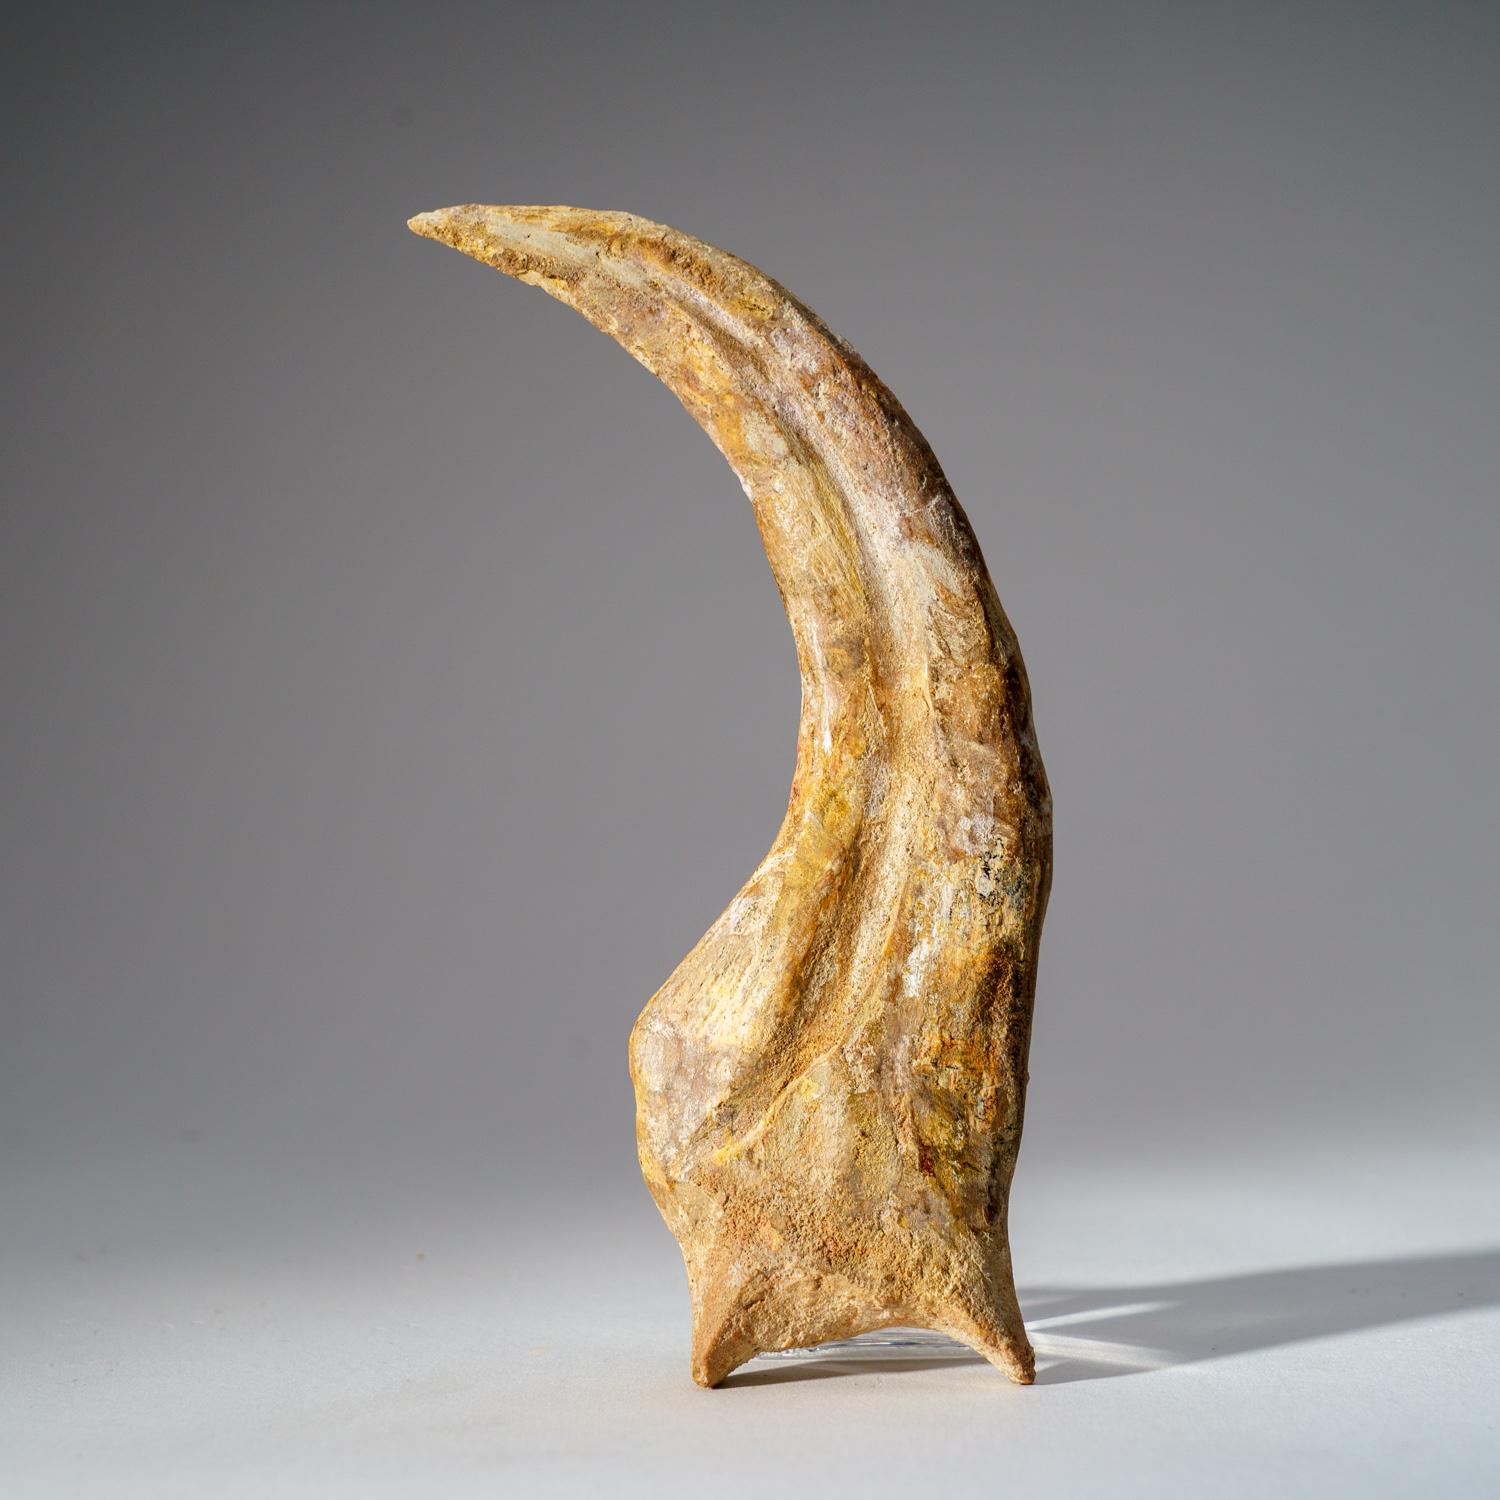 This huge, Museum-quality Spinosaur foot claw is genuine, completely in tact with no repairs and in prestine condition. This incredible specimen includes a display box for preservation and display purposes. Spinosaurus (meaning 